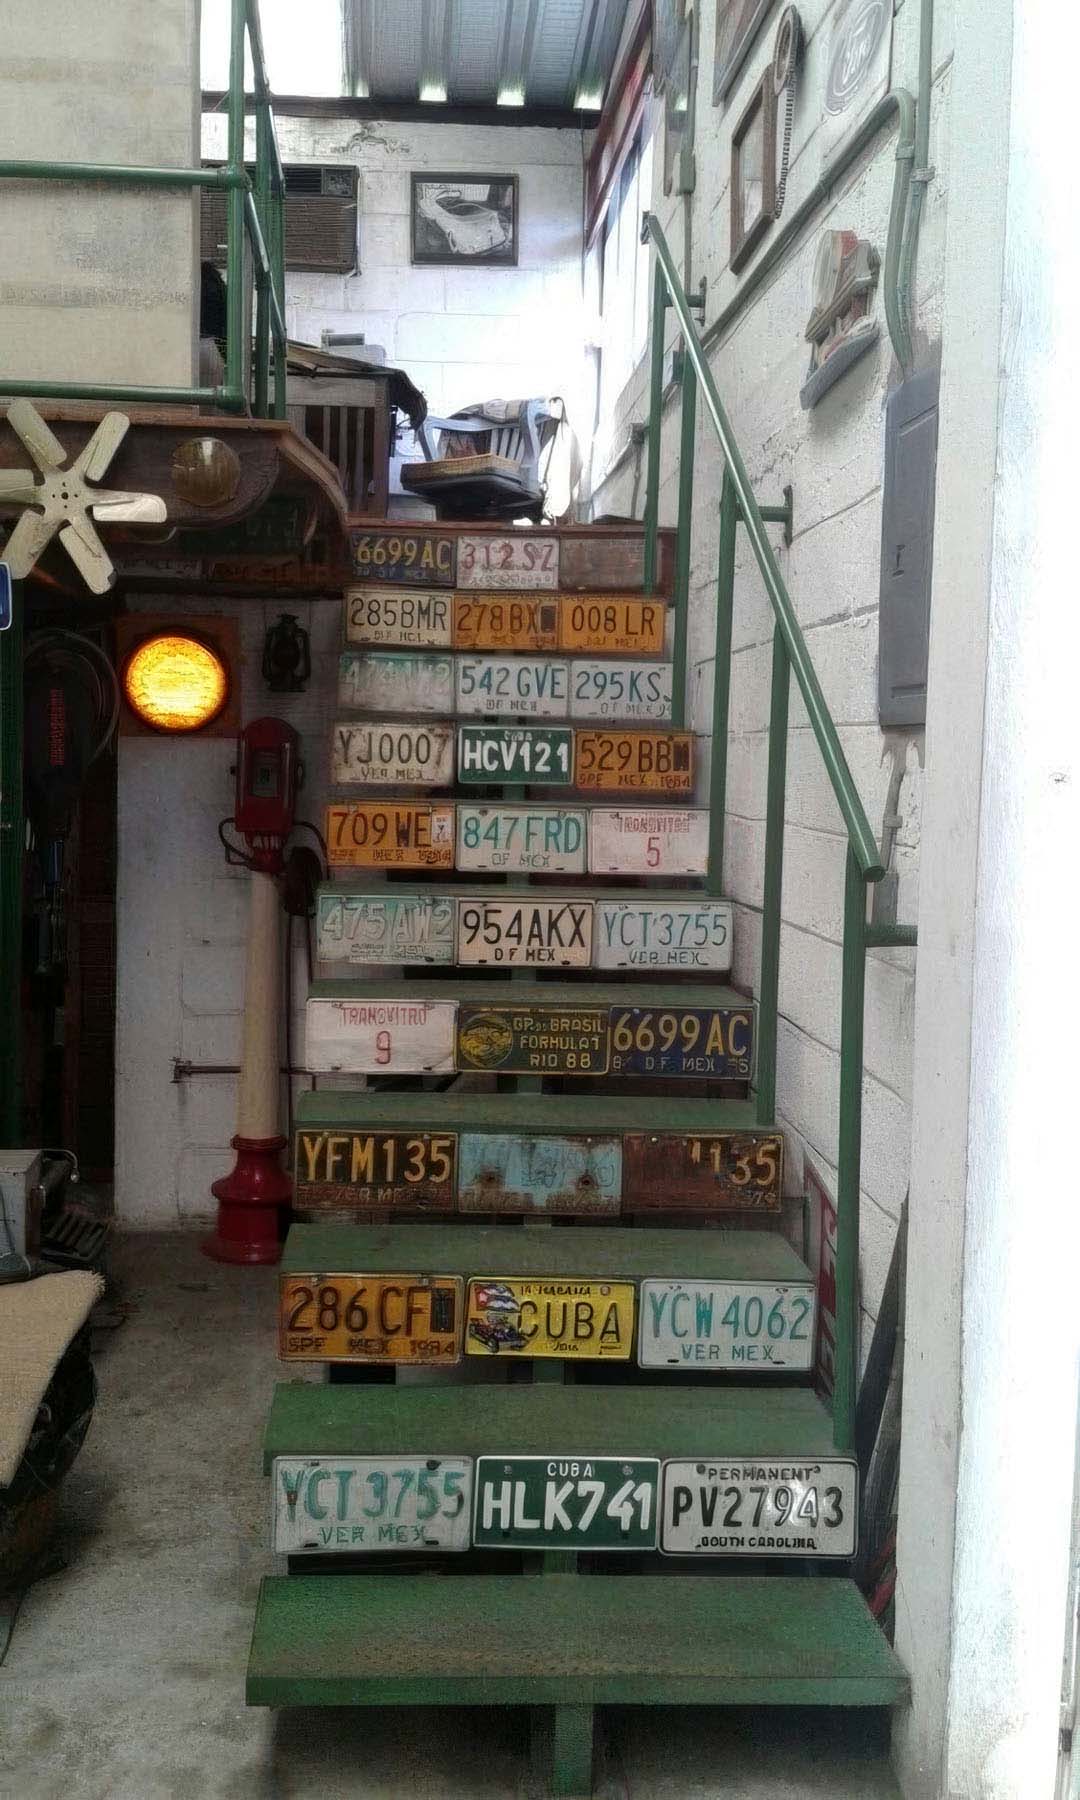 Vintage license plates on stairs